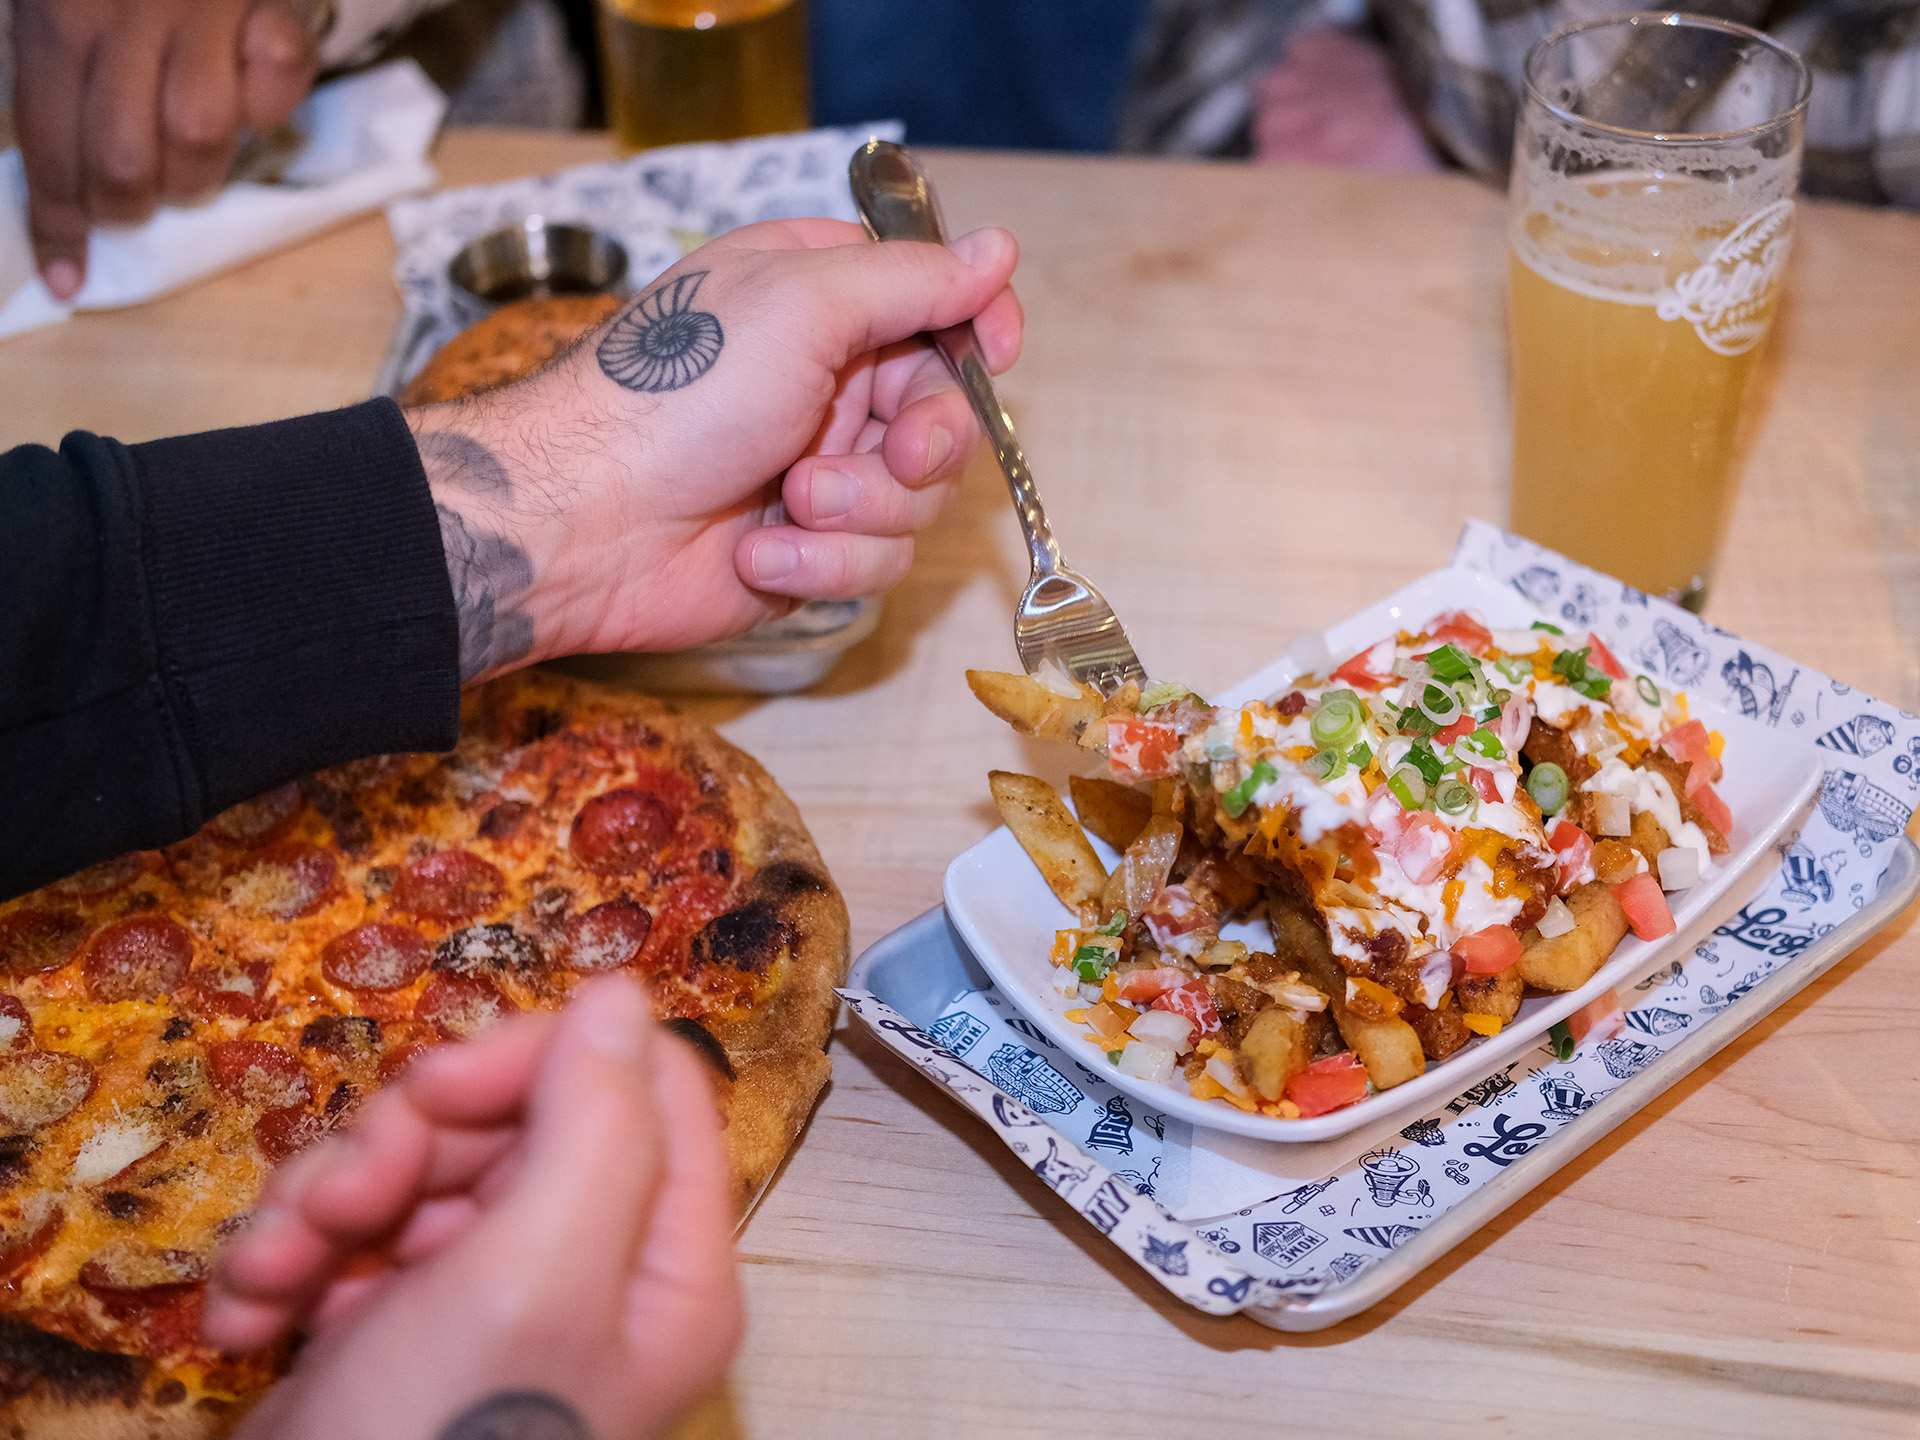 The best patios in Toronto | Pizza and chili fries at Left Field Brewery Liberty Village